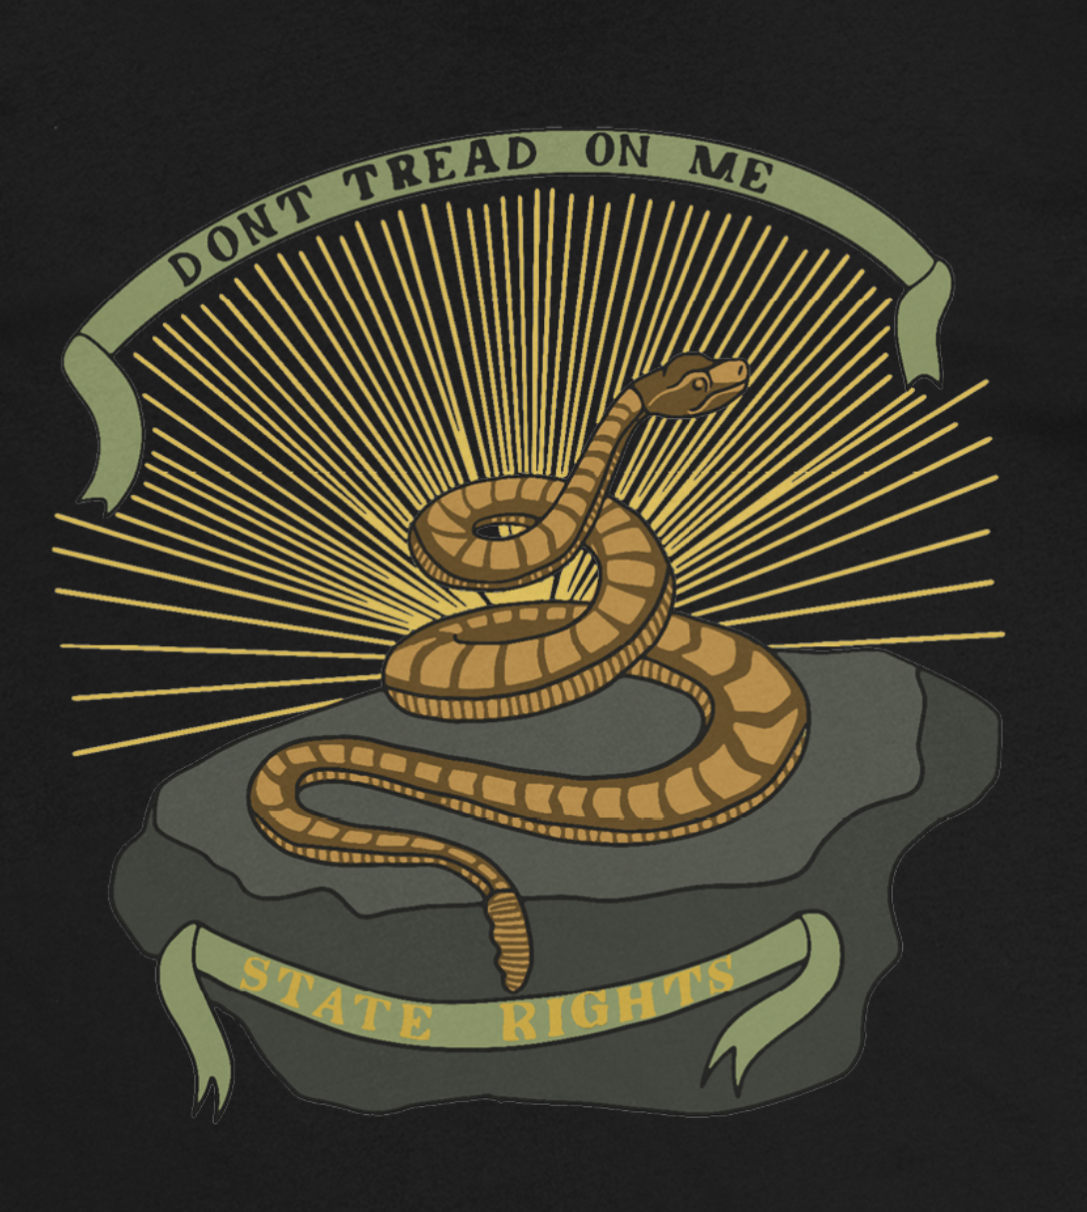 "State Rights - Don't Tread on Me" Georgia Secession Flag Shirt